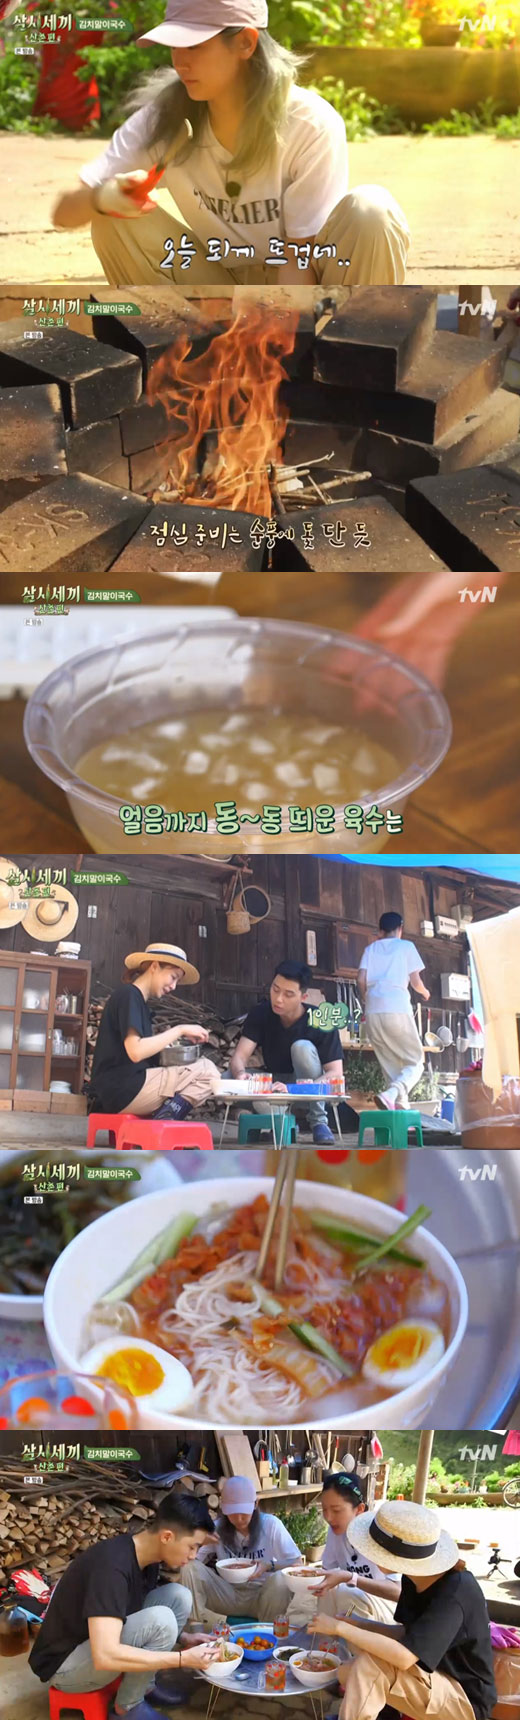 A restaurant was opened in the village of Samshi Sekisui, and a different food was followed.In the 10th cable channel tvN entertainment program Shishi Sekisui Mountain Village broadcasted on the 11th, Actor Yum Jung-ah, Yoon Se-ah, and Park So-dam were drawn with their fourth guest, Actor Park Seo-joon.On the day of the broadcast, four people decided to eat kimchi noodles as a lunch menu.When Yum Jung-ah was cutting kimchi to enter the noodles, Park Seo-joon came to Is there anything necessary? Yum Jung-ah asked him to put the kimchi in the refrigerator if you put it in.Then, when Yum Jung-ah asked, Did not you see the first chef who can not do this? Park Seo-joon gave a sensible answer saying, Knife is important or taste is important.The four people gathered on the table said, It is so delicious. The finished kimchi was eaten with noodles, and I was expecting to eat steak, which is a dinner menu made by Park Seo-joon.The family members of the mountain village then went to Mart to see the market; they bought kimbap laver for breakfast the next morning and wine juice, a steak substitute sauce, and then bought additional fish paste and ice cream.For a while, the men went out to see the neighborhood. After visiting the Miri mural village, they visited the bakery to buy bread for Pasta.After worrying about the bosss words that there was no baguette, I bought a morning bread.As evening approached, Yum Jung-ah tried to trade the production team; Yum Jung-ah said, Seo Jun-yi says he is good at Western cuisine.I asked if I could use it because I brought beef for steak to give us (cooking). When Na Young-seok asked, How much beef is expensive, how much do you bring? Park Seo-joon replied, I only brought enough to fill the boat.Eventually, Na Young-seok gave consideration to the guest brought it and I will give it special permission.Park Seo-joon opened a so-called Sanchon Restaurant, making not only steak but also blue pasta and mashed potato.In particular, Park Seo-joon laughed at the amount of enormous blue light Pasta, saying, Is not it a cooking bottle?Yoon Se-ah and Park So-dam, who were washing dishes after the storm food, expressed satisfaction that I really enjoyed this evening and I did not know how to eat steak and pasta here.The rain from the night continued until the next morning, and the four decided to make kimbap with breakfast menu.I took the kimbap ingredients such as cucumber, pepper, carrot, kimchi, egg, etc. out of the refrigerator and prepared Miri. Yoon Se-ah and Park So-dam picked sesame leaves and spinach.It was not until 12 oclock to the fish cake soup with Yum Jung-ah boiled that Kimbap was completed.The four people started eating quickly, and then there was talk of Yum Jung-ahs rope-skipping challenge.Yum Jung-ah had to go to Mart and make a jump rope to get the money to spend from the crew, and after practicing in the backyard with Park Seo-joons specialties, he headed to the crew.Na Young-seok asked Yum Jung-ah for a high difficulty, saying, We set 12 goals yesterday; we have to target 16 after a day.With tensions in the air, Yum Jung-ah succeeded in 16 jump ropes at once and earned 10,000 won for the production team.After that, four people decided to go to the market with joy, and Yum Jung-ah said, I was worried for two days, and I was so worried that I was so sorry.